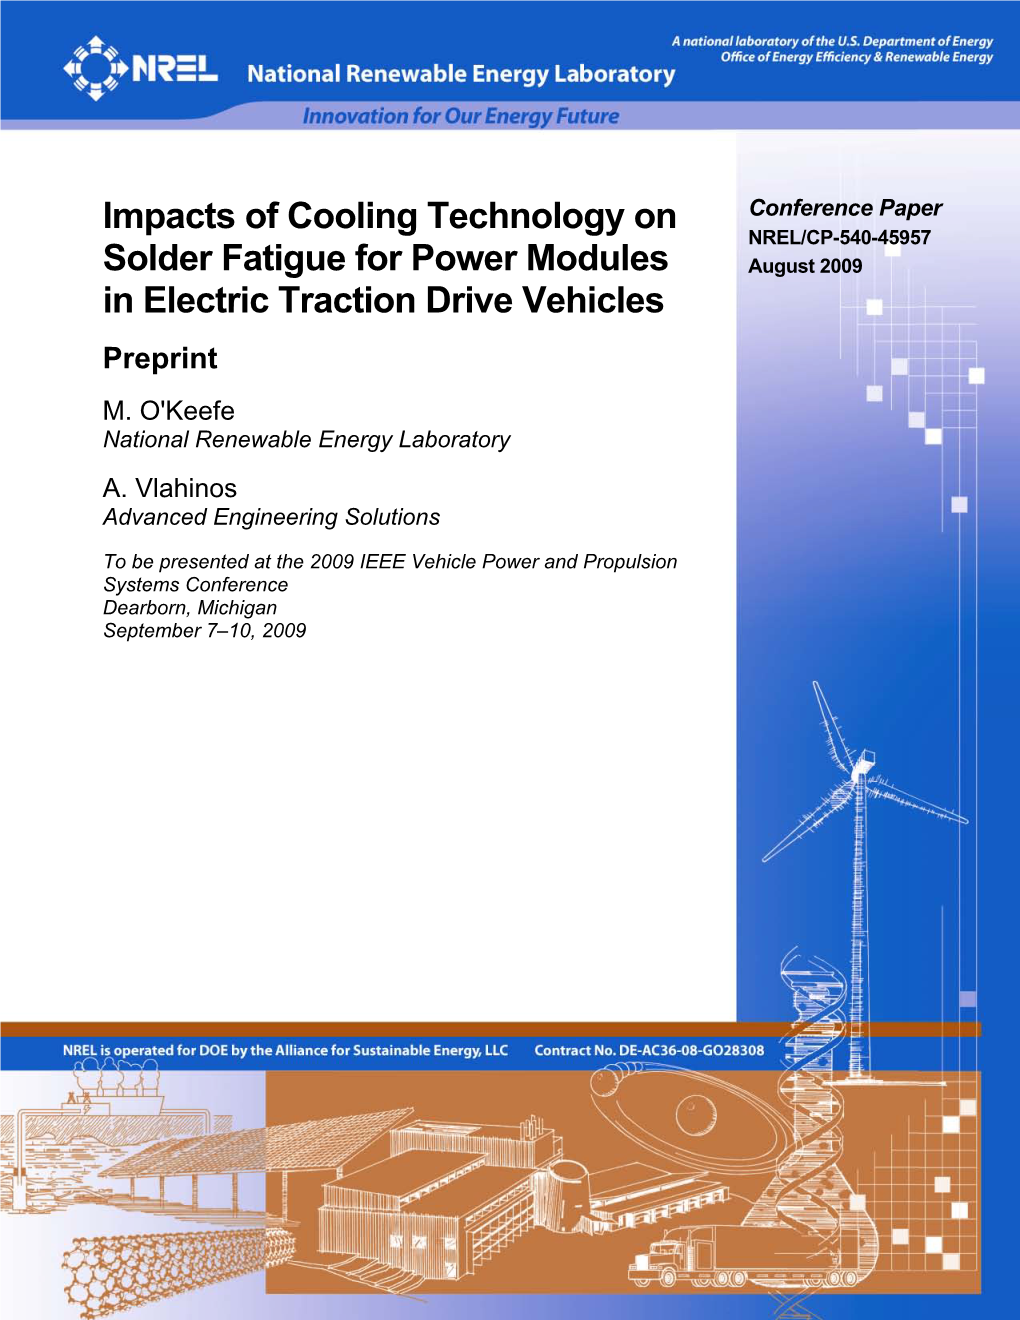 Impacts of Cooling Technology on Solder Fatigue for Power Modules in Electric Traction Drive Vehicles